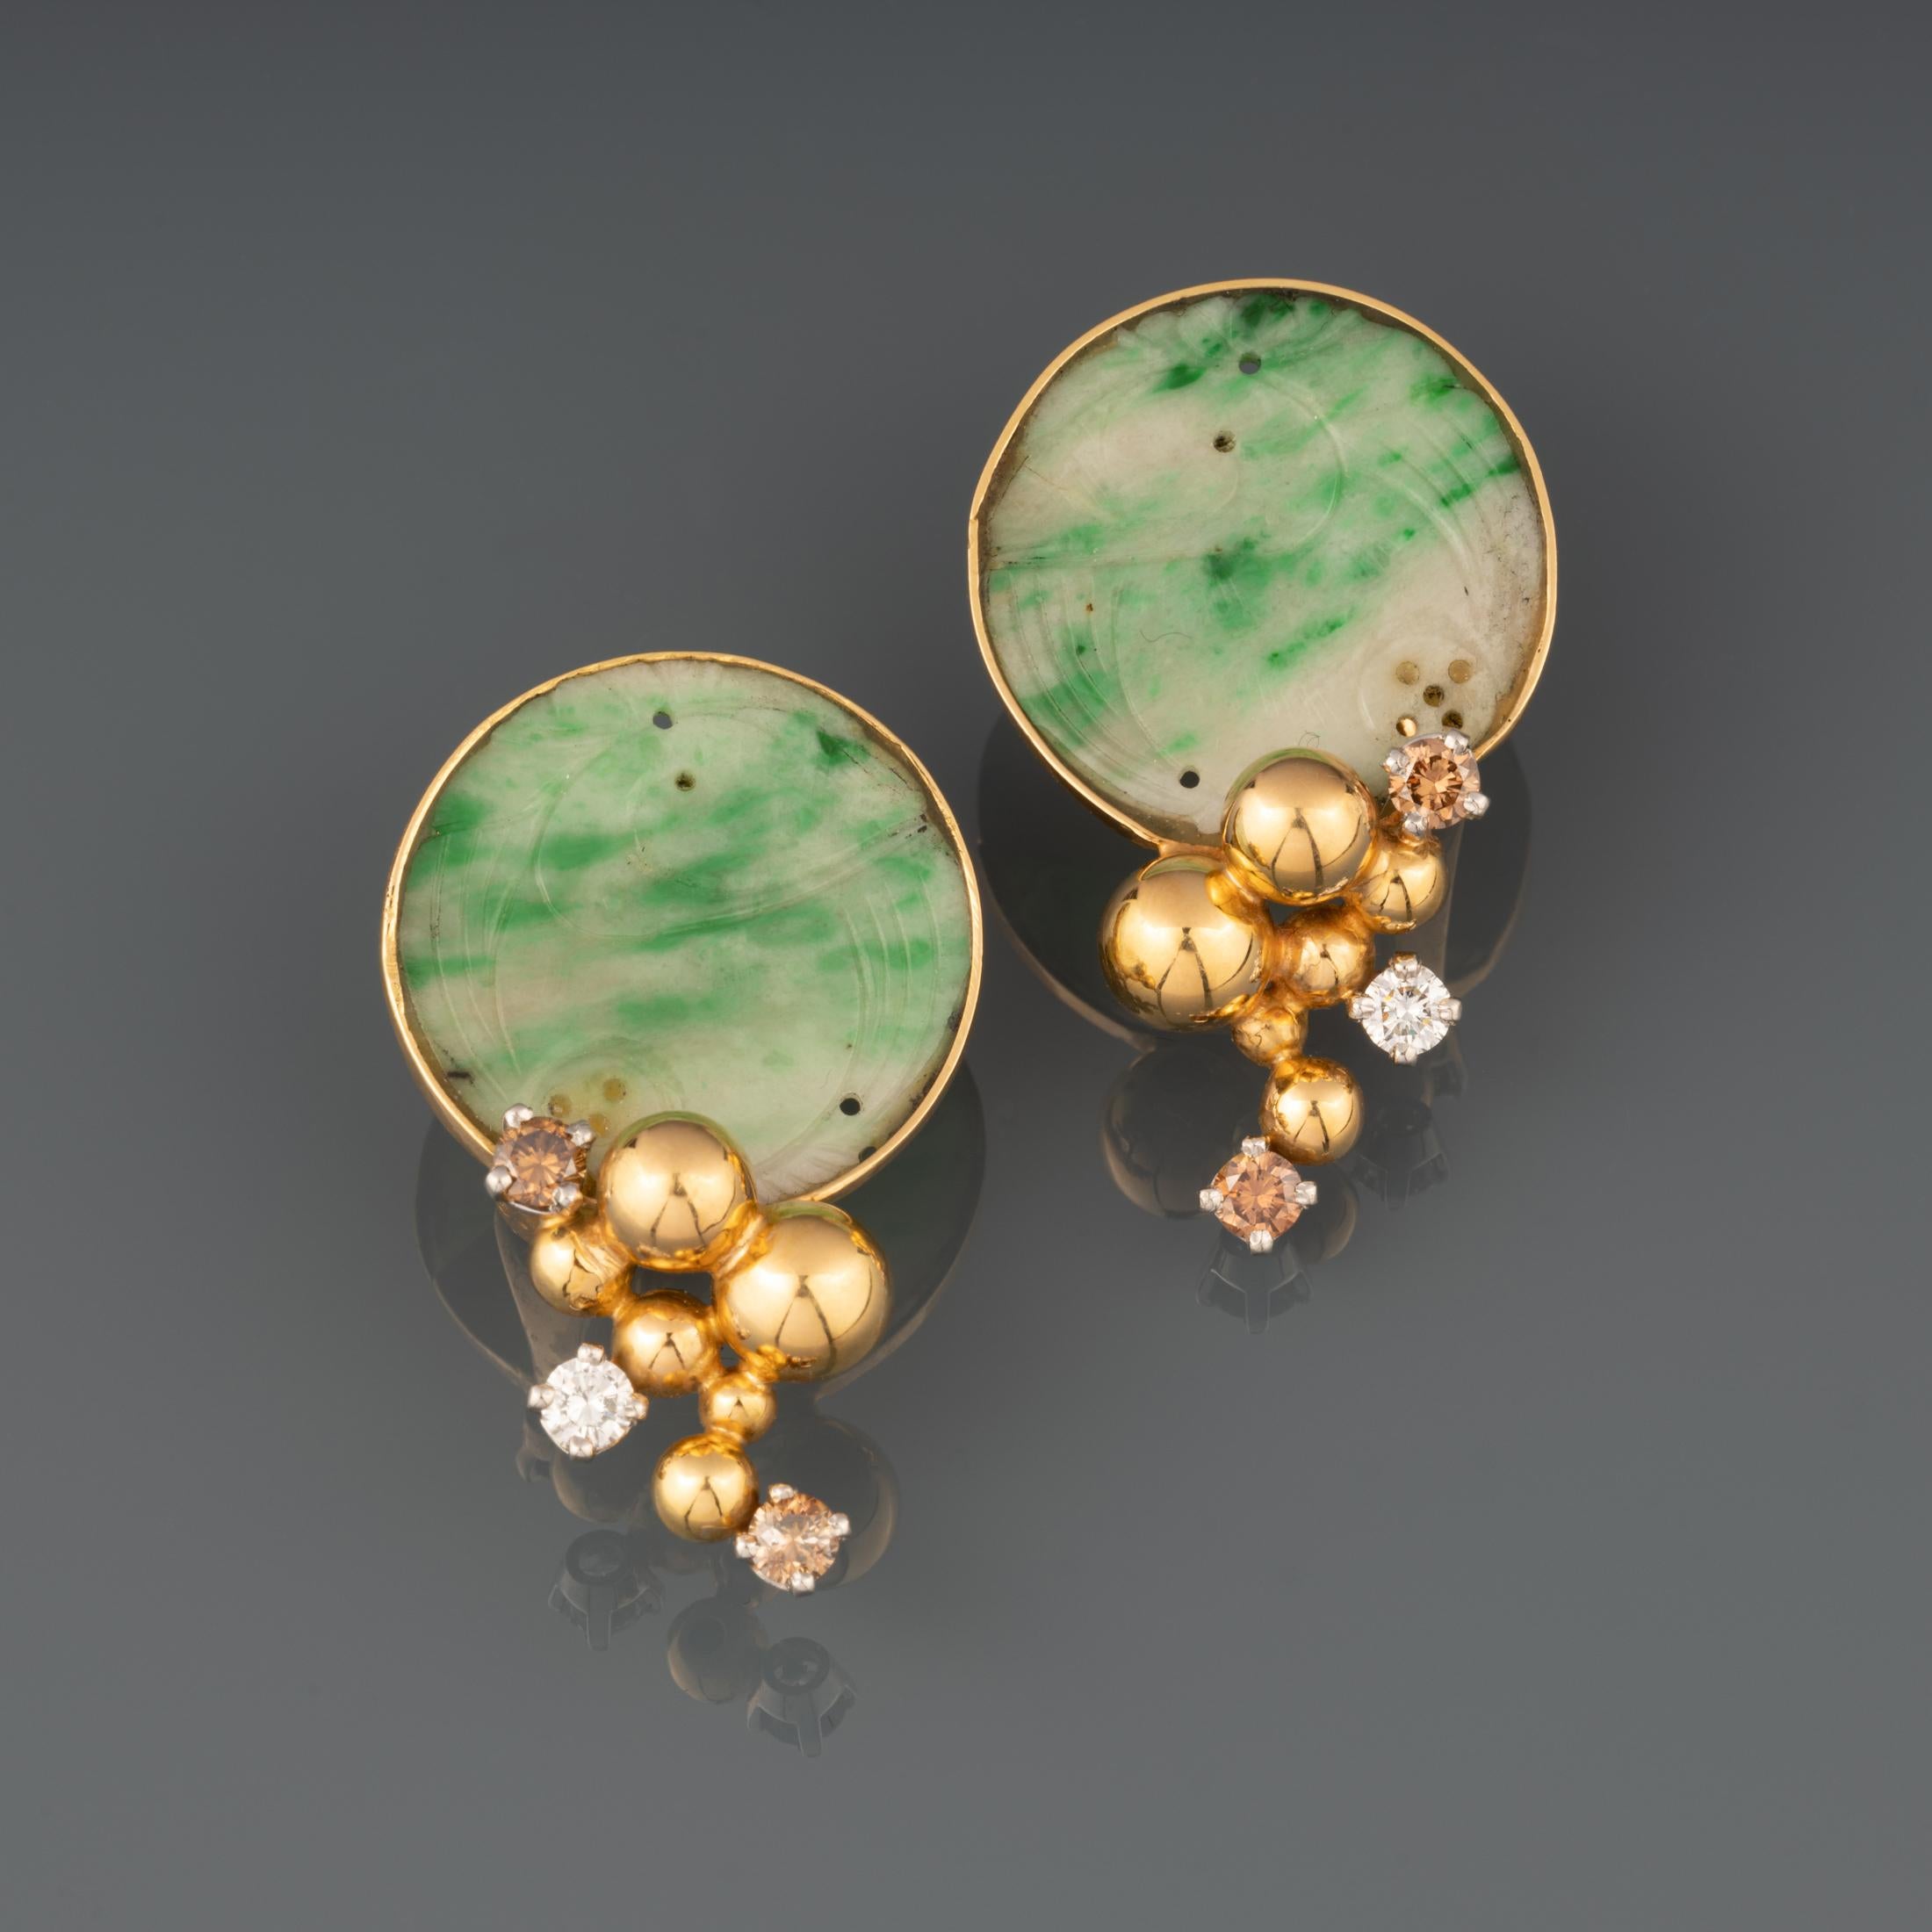 A beautiful vintage pair of earrings, made by great French creator Jean Vendome.

Made in yellow gold 18k and set with diamonds and two handgrave Jades Jadeite.

37 mm height, the jade diameter is 22mm.

Weight: 13.50 grams

Signed